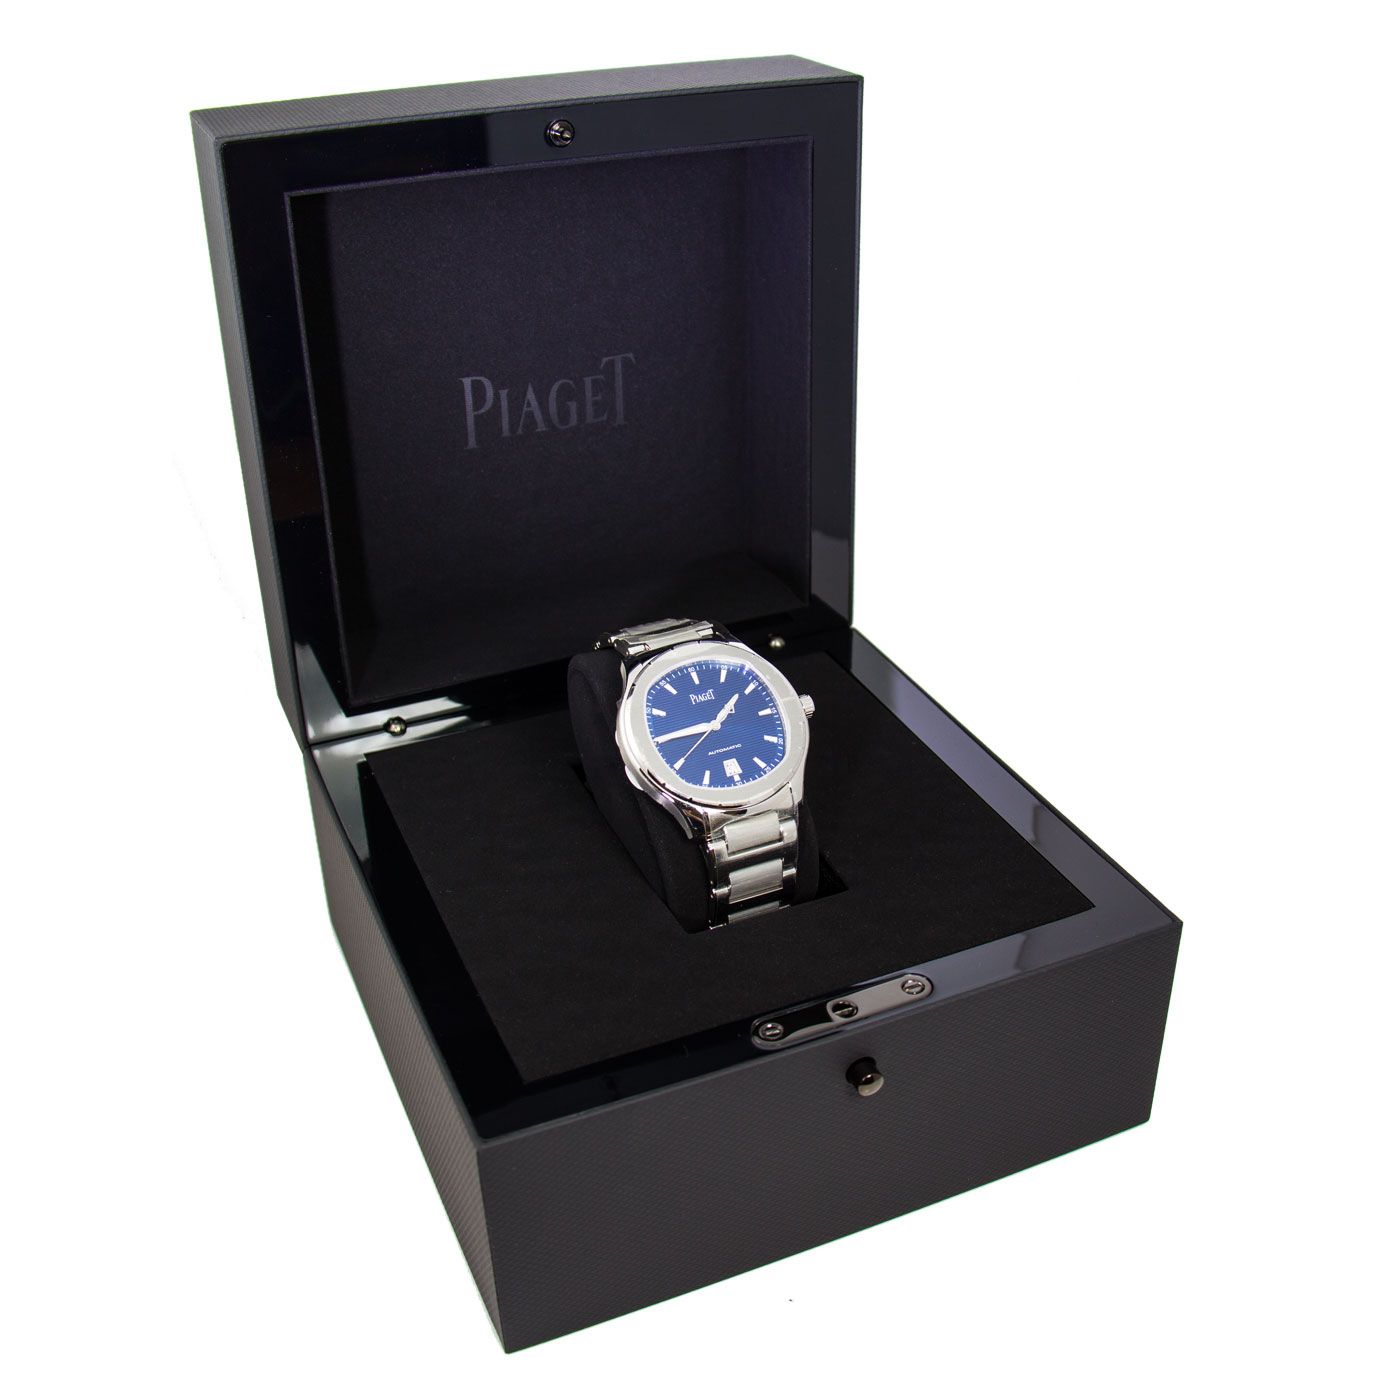 Piaget Polo S watch G0A41002 | New Authentic Watches of Mayfair